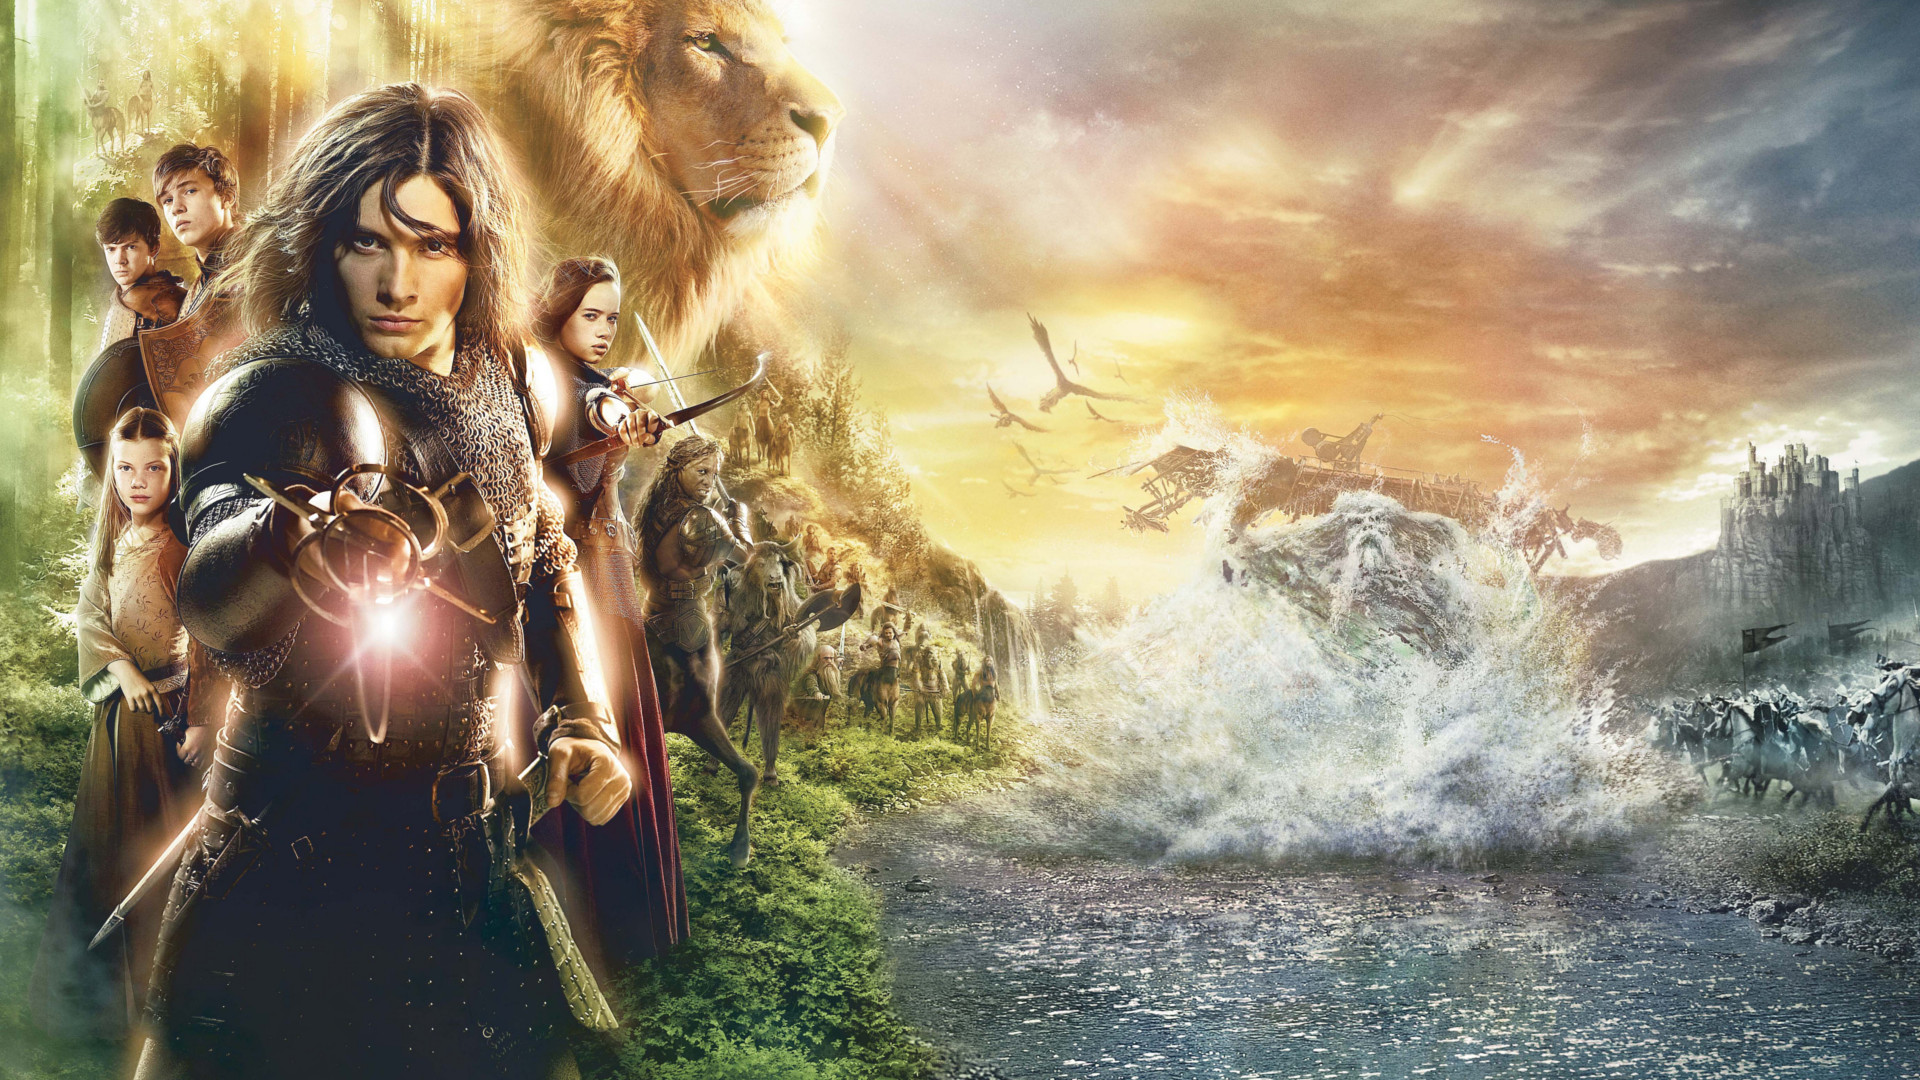 10 The Chronicles of Narnia Prince Caspian HD Wallpapers and Backgrounds